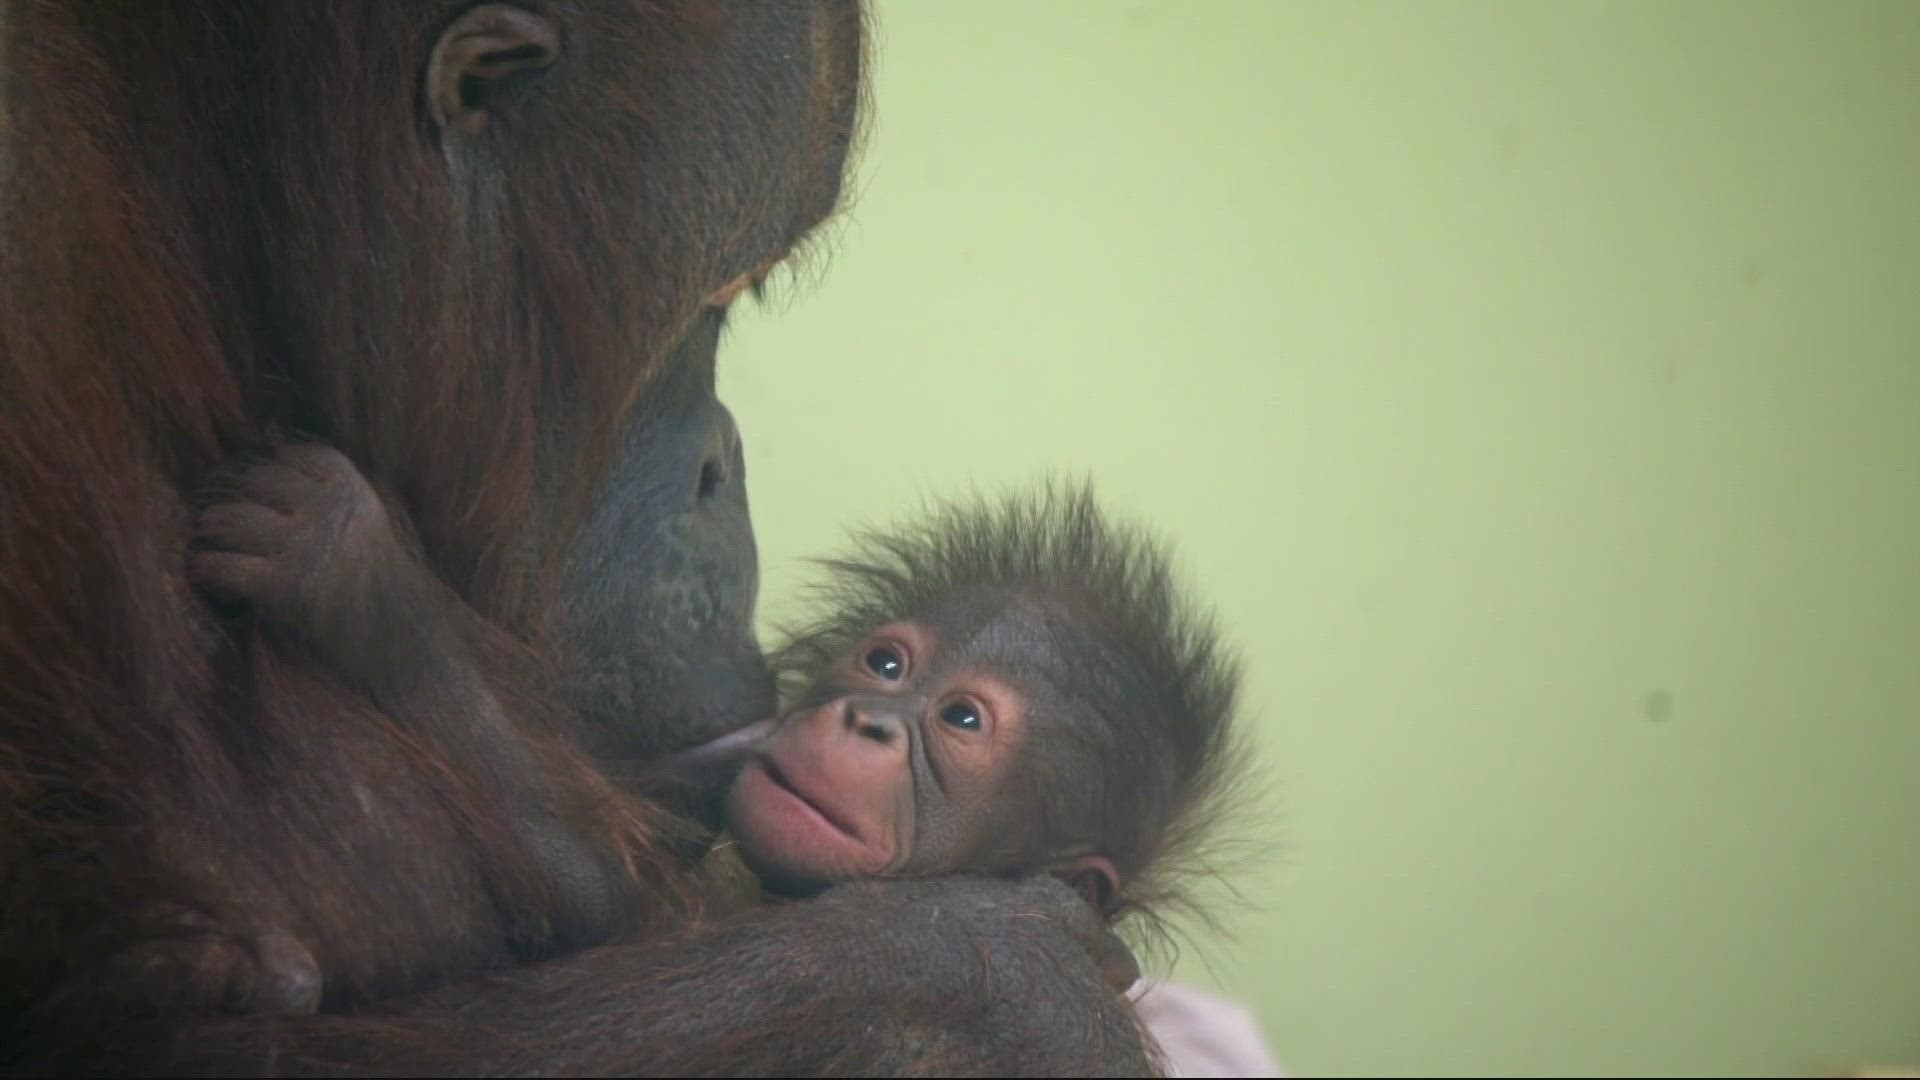 KGW Sunrise has been celebrating Mother's Day all week long. Drew Carney visited the Oregon Zoo to meet some of the moms there, including new mom Kitra the orangutan